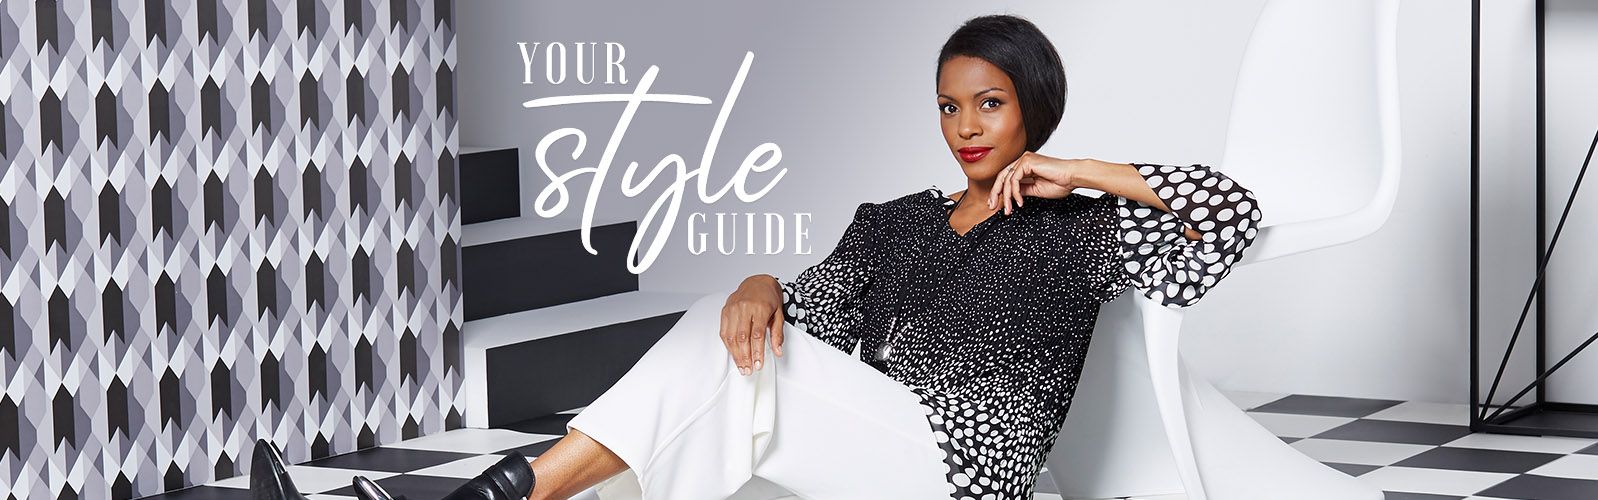 Your Style Guide - Monochrome